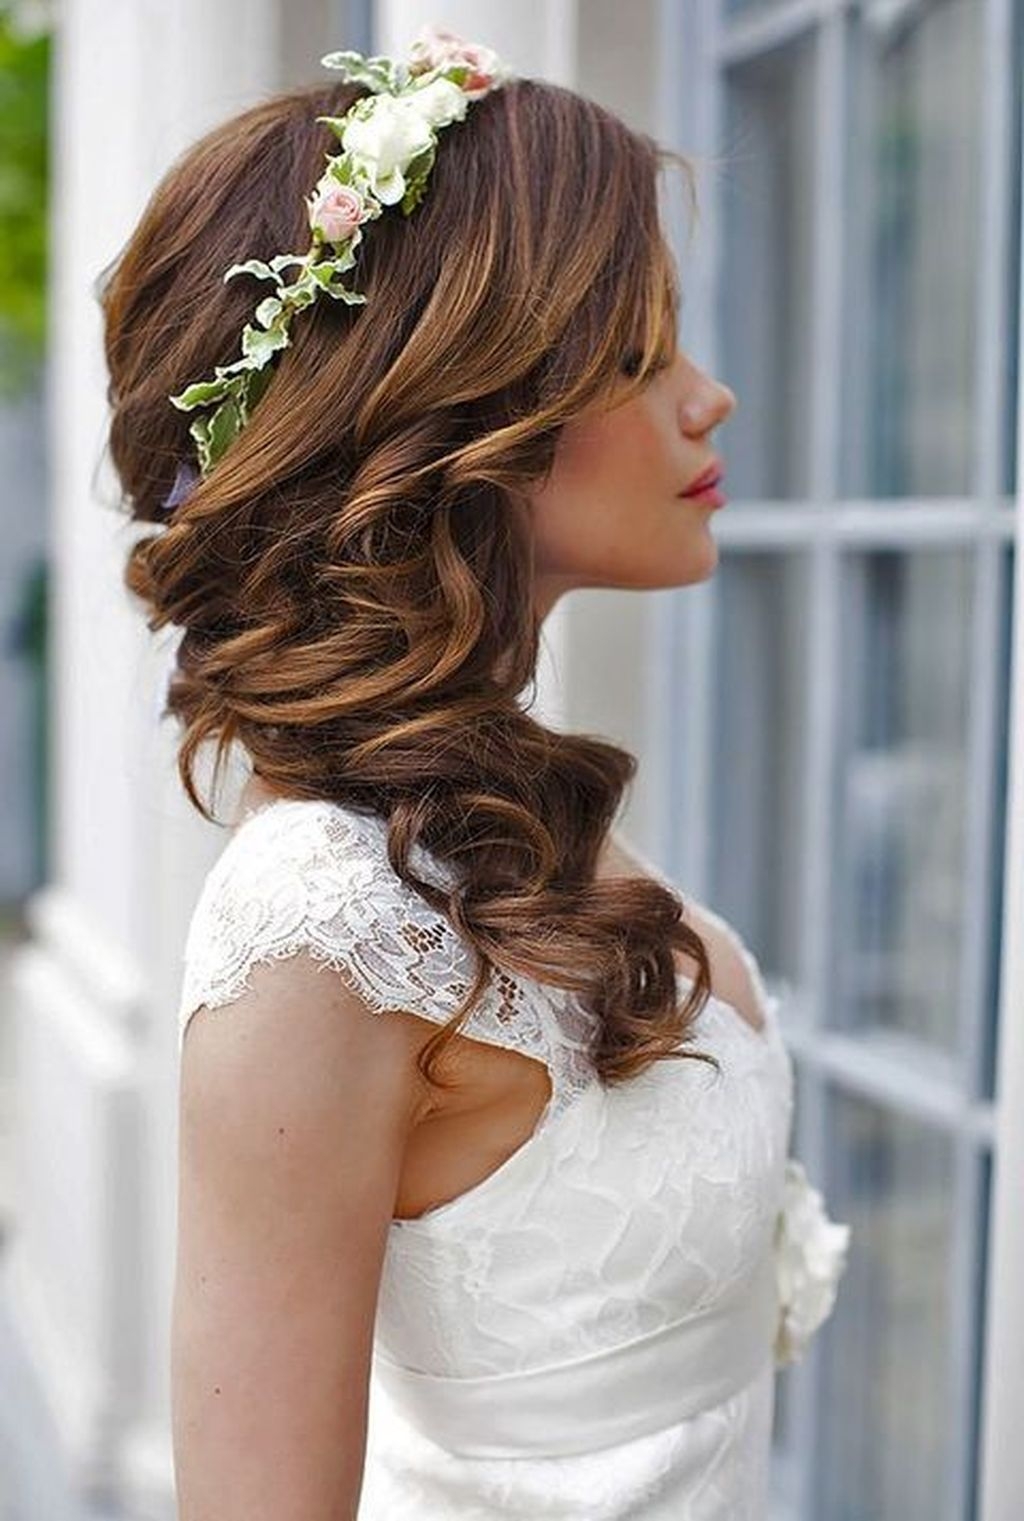 Elegant Wedding Hairstyle Ideas For Brides To Try16 